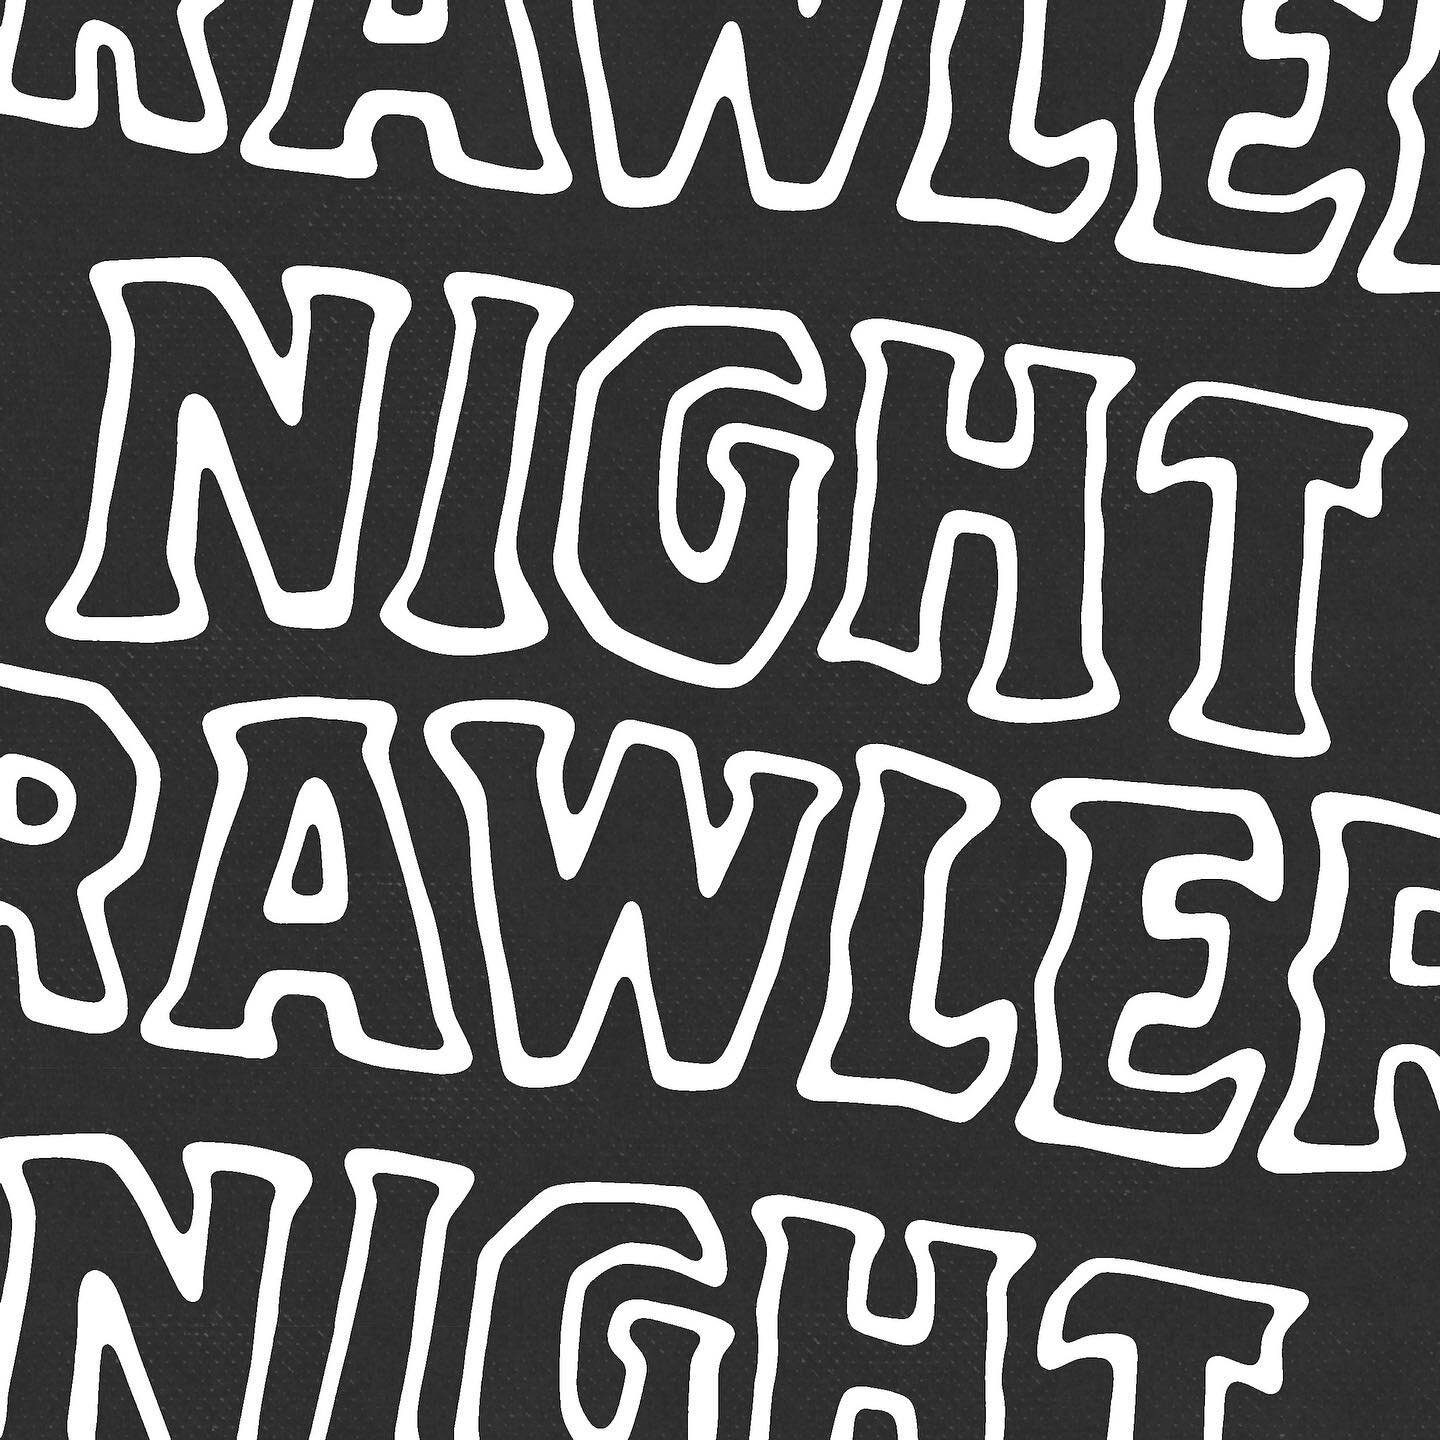 Working on and laying out designs for 2021. Got some cool stuff in the works, excited to put some new threads on your grubs. #nightcrawlerco